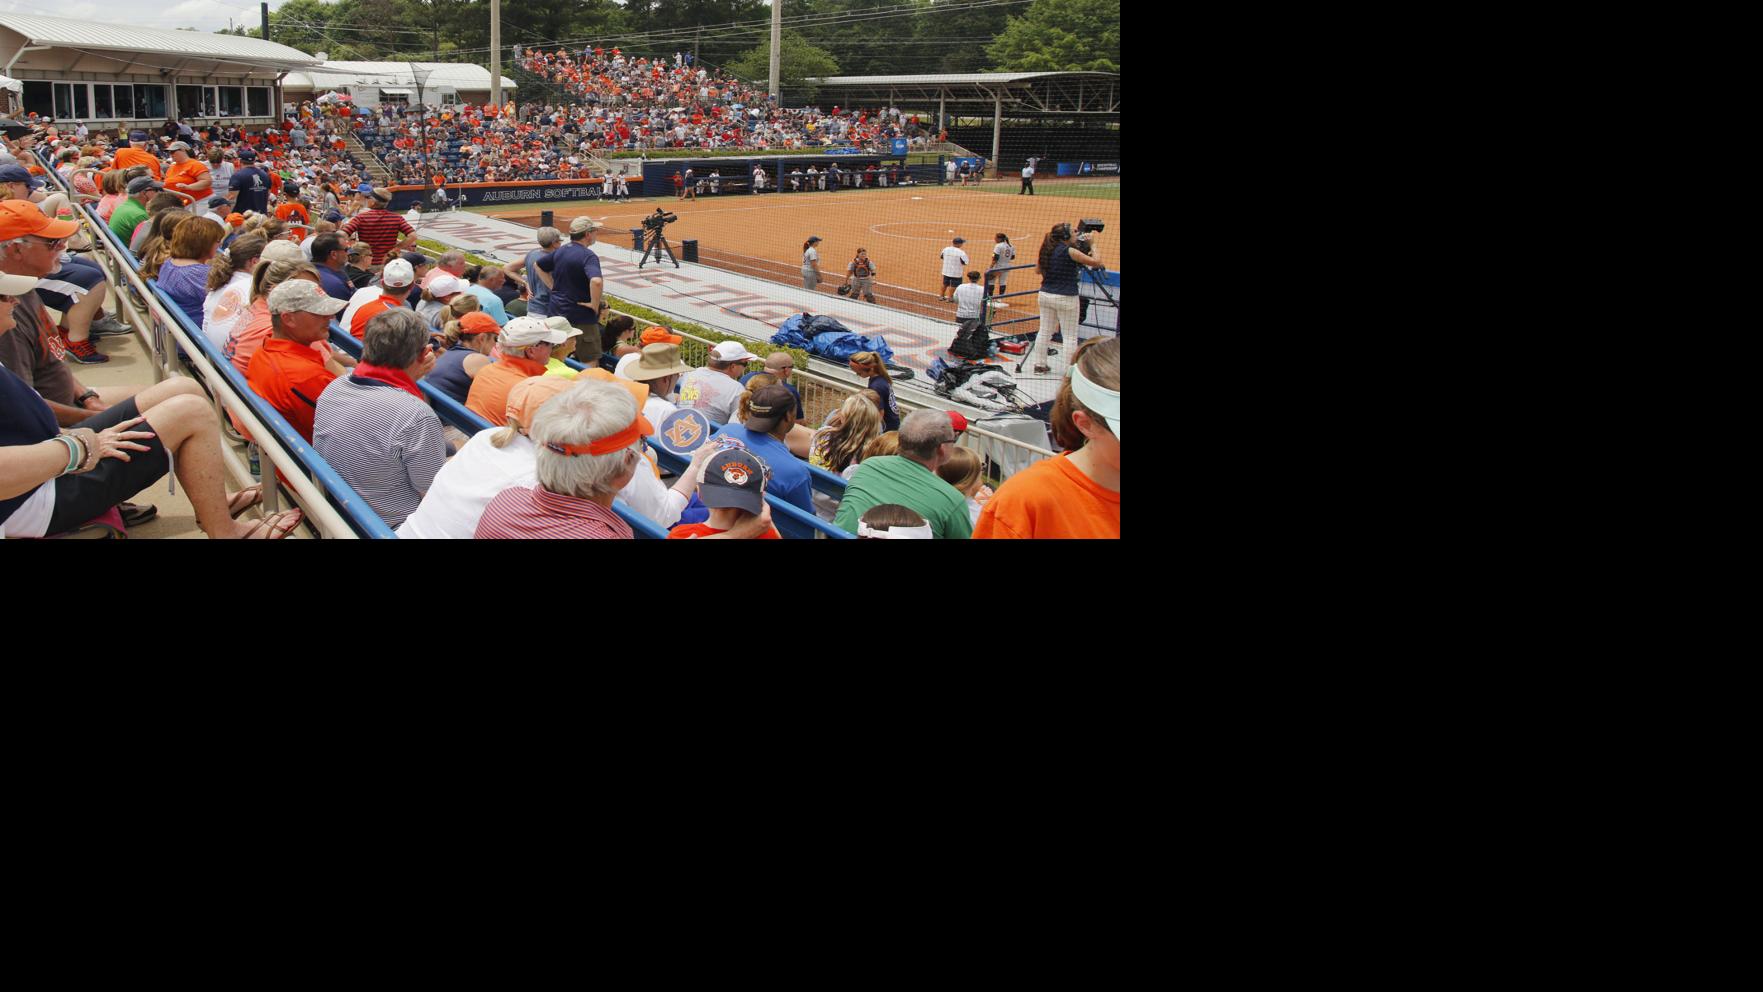 Auburn looking into expanded seating for softball games | Auburn University Sports News | oanow.com